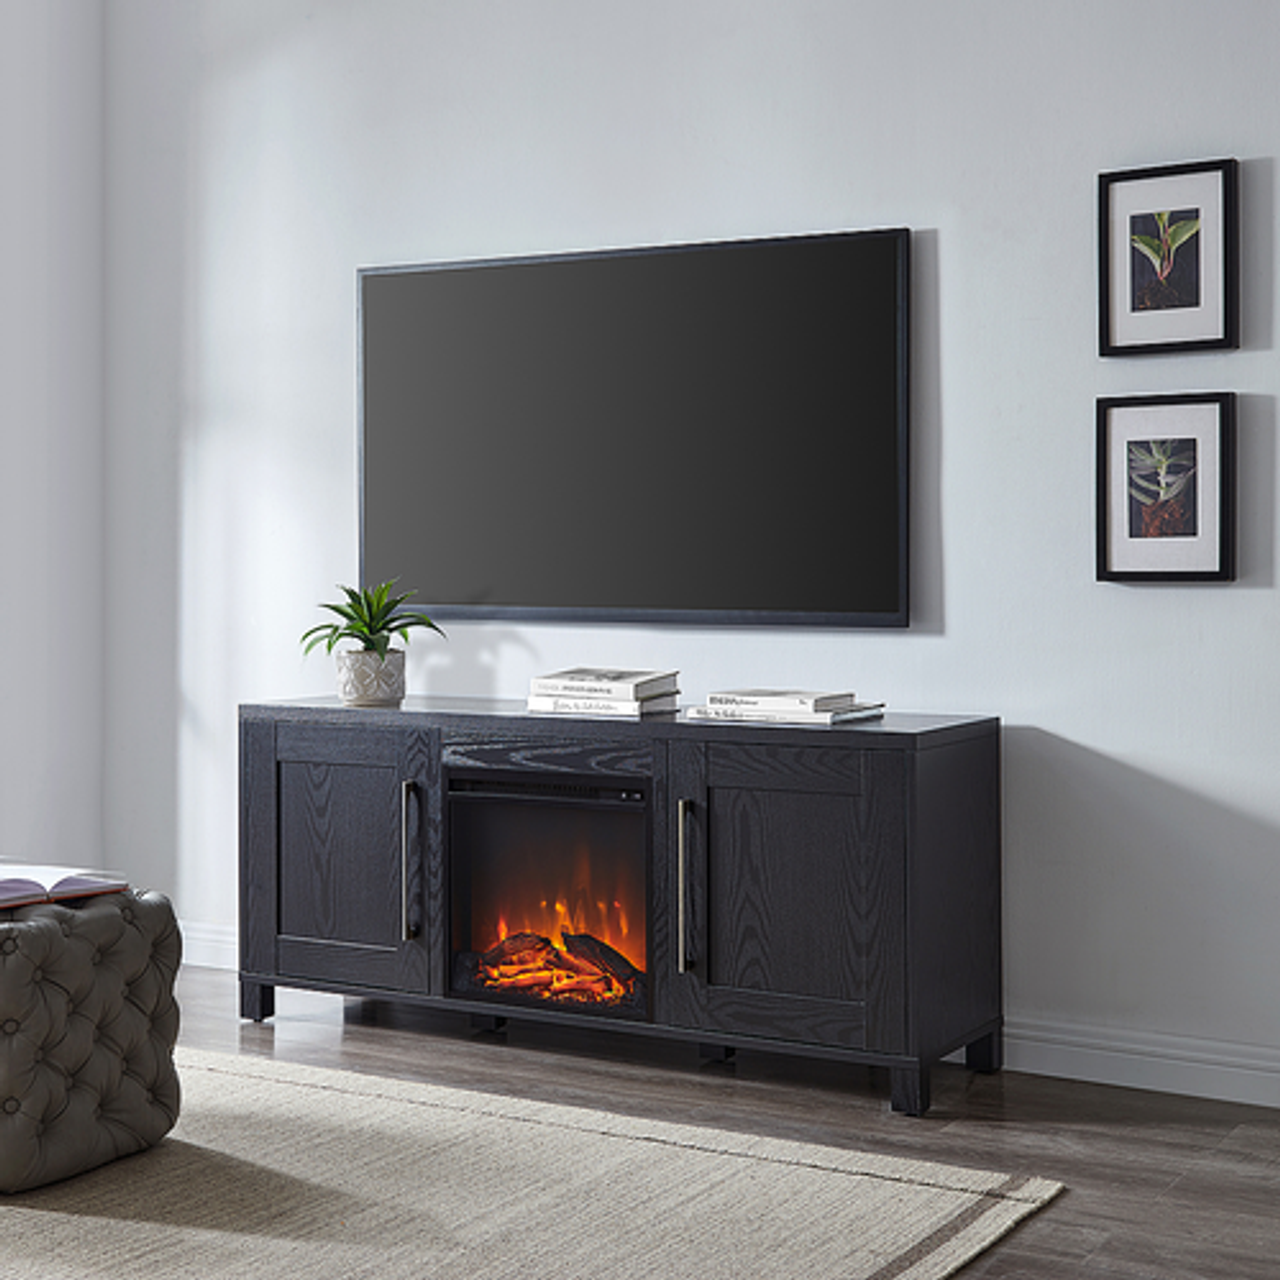 Camden&Wells - Chabot Log Fireplace TV Stand for TVs up to 65" - Black Grain